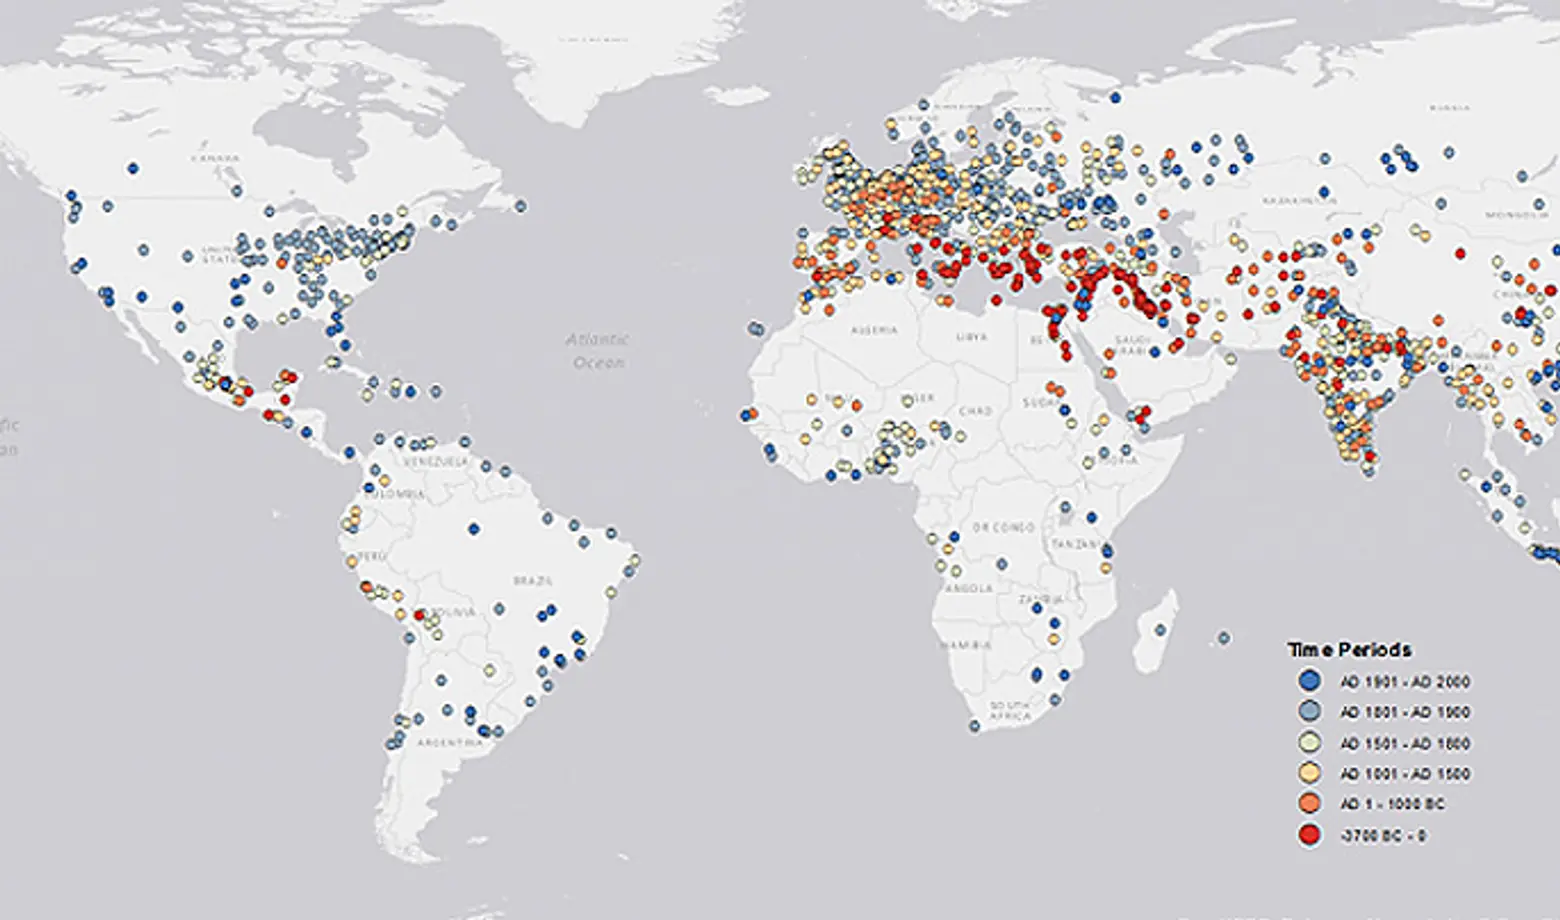 MAP: Visualizing Urban Development from 3700 B.C. to 2000 A.D.